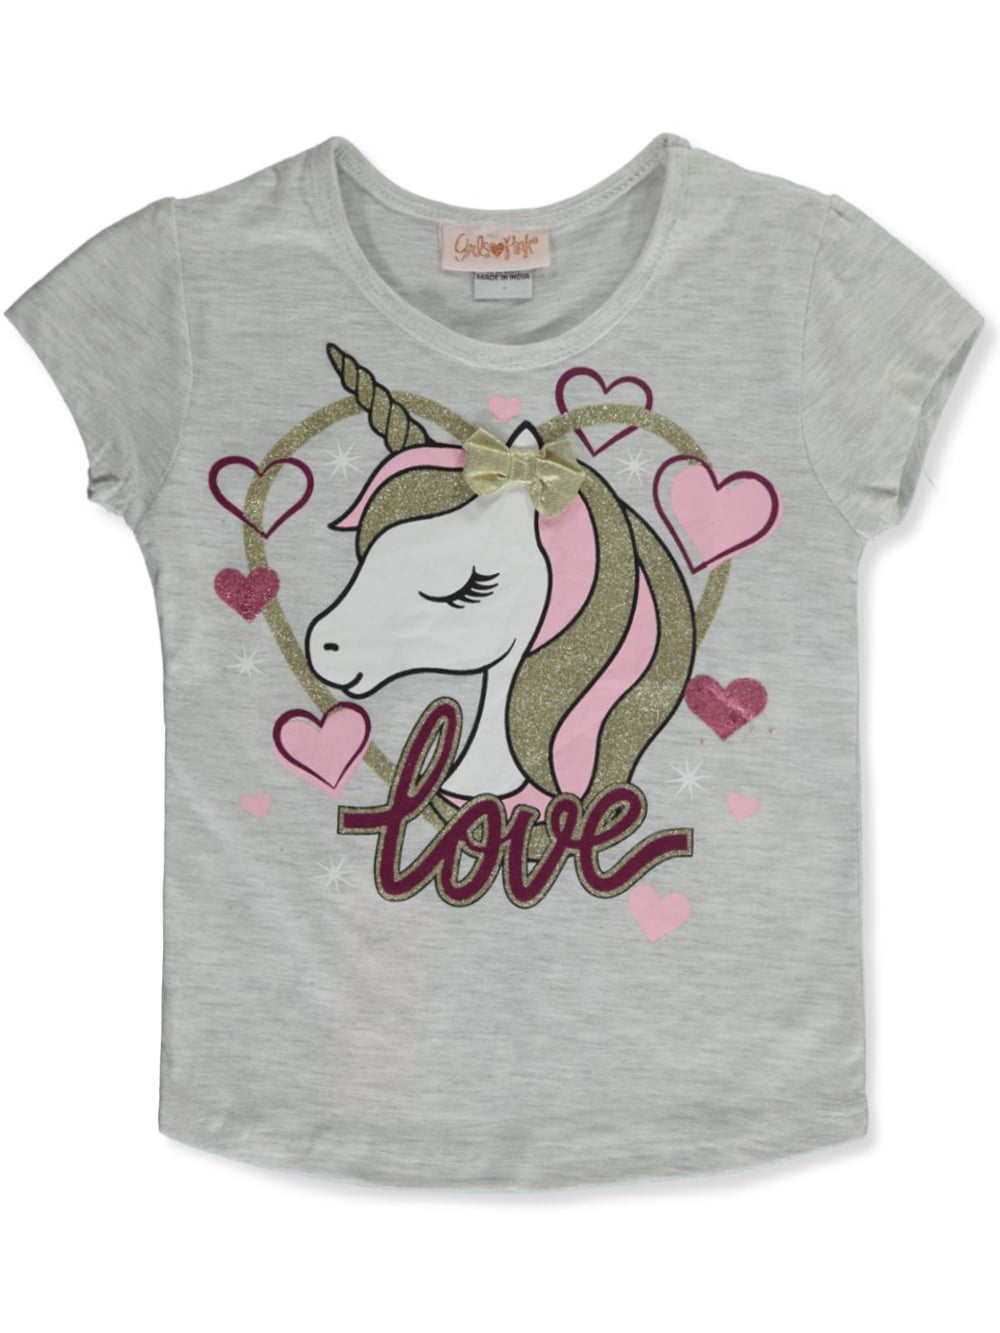 US Stock Toddler Kids Girls Unicorn Butterfly Tops T-shirt Clothes Costume O51 